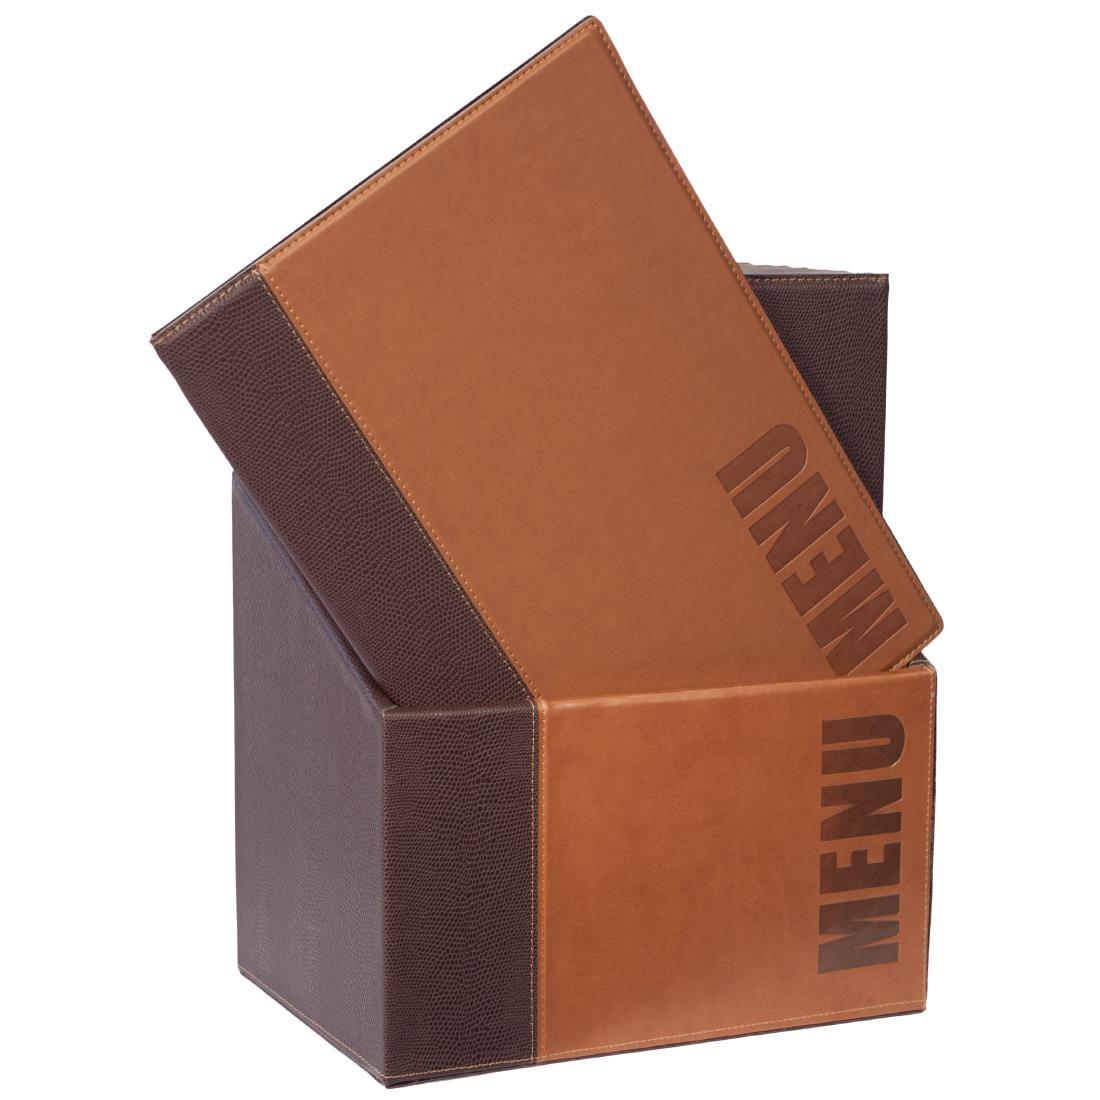 Securit Contemporary Menu Covers and Storage Box A4 Tan (Pack of 20) - U268  - 1